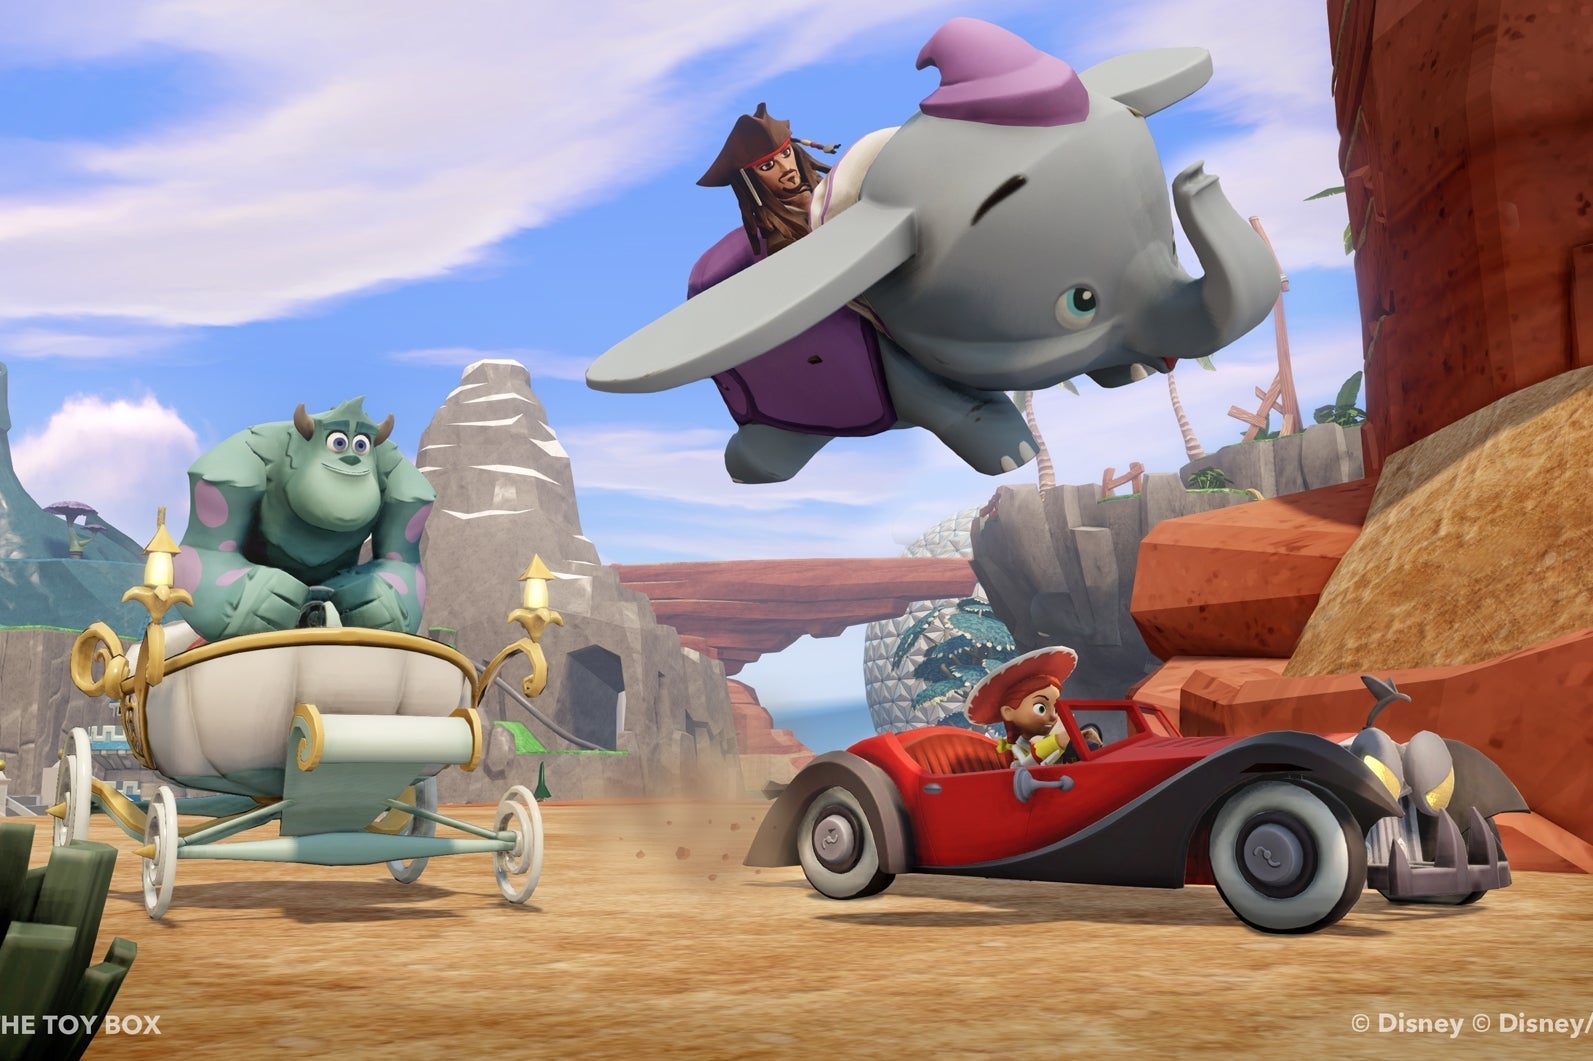 Image for Disney Infinity trailer shows off Toy Box mode